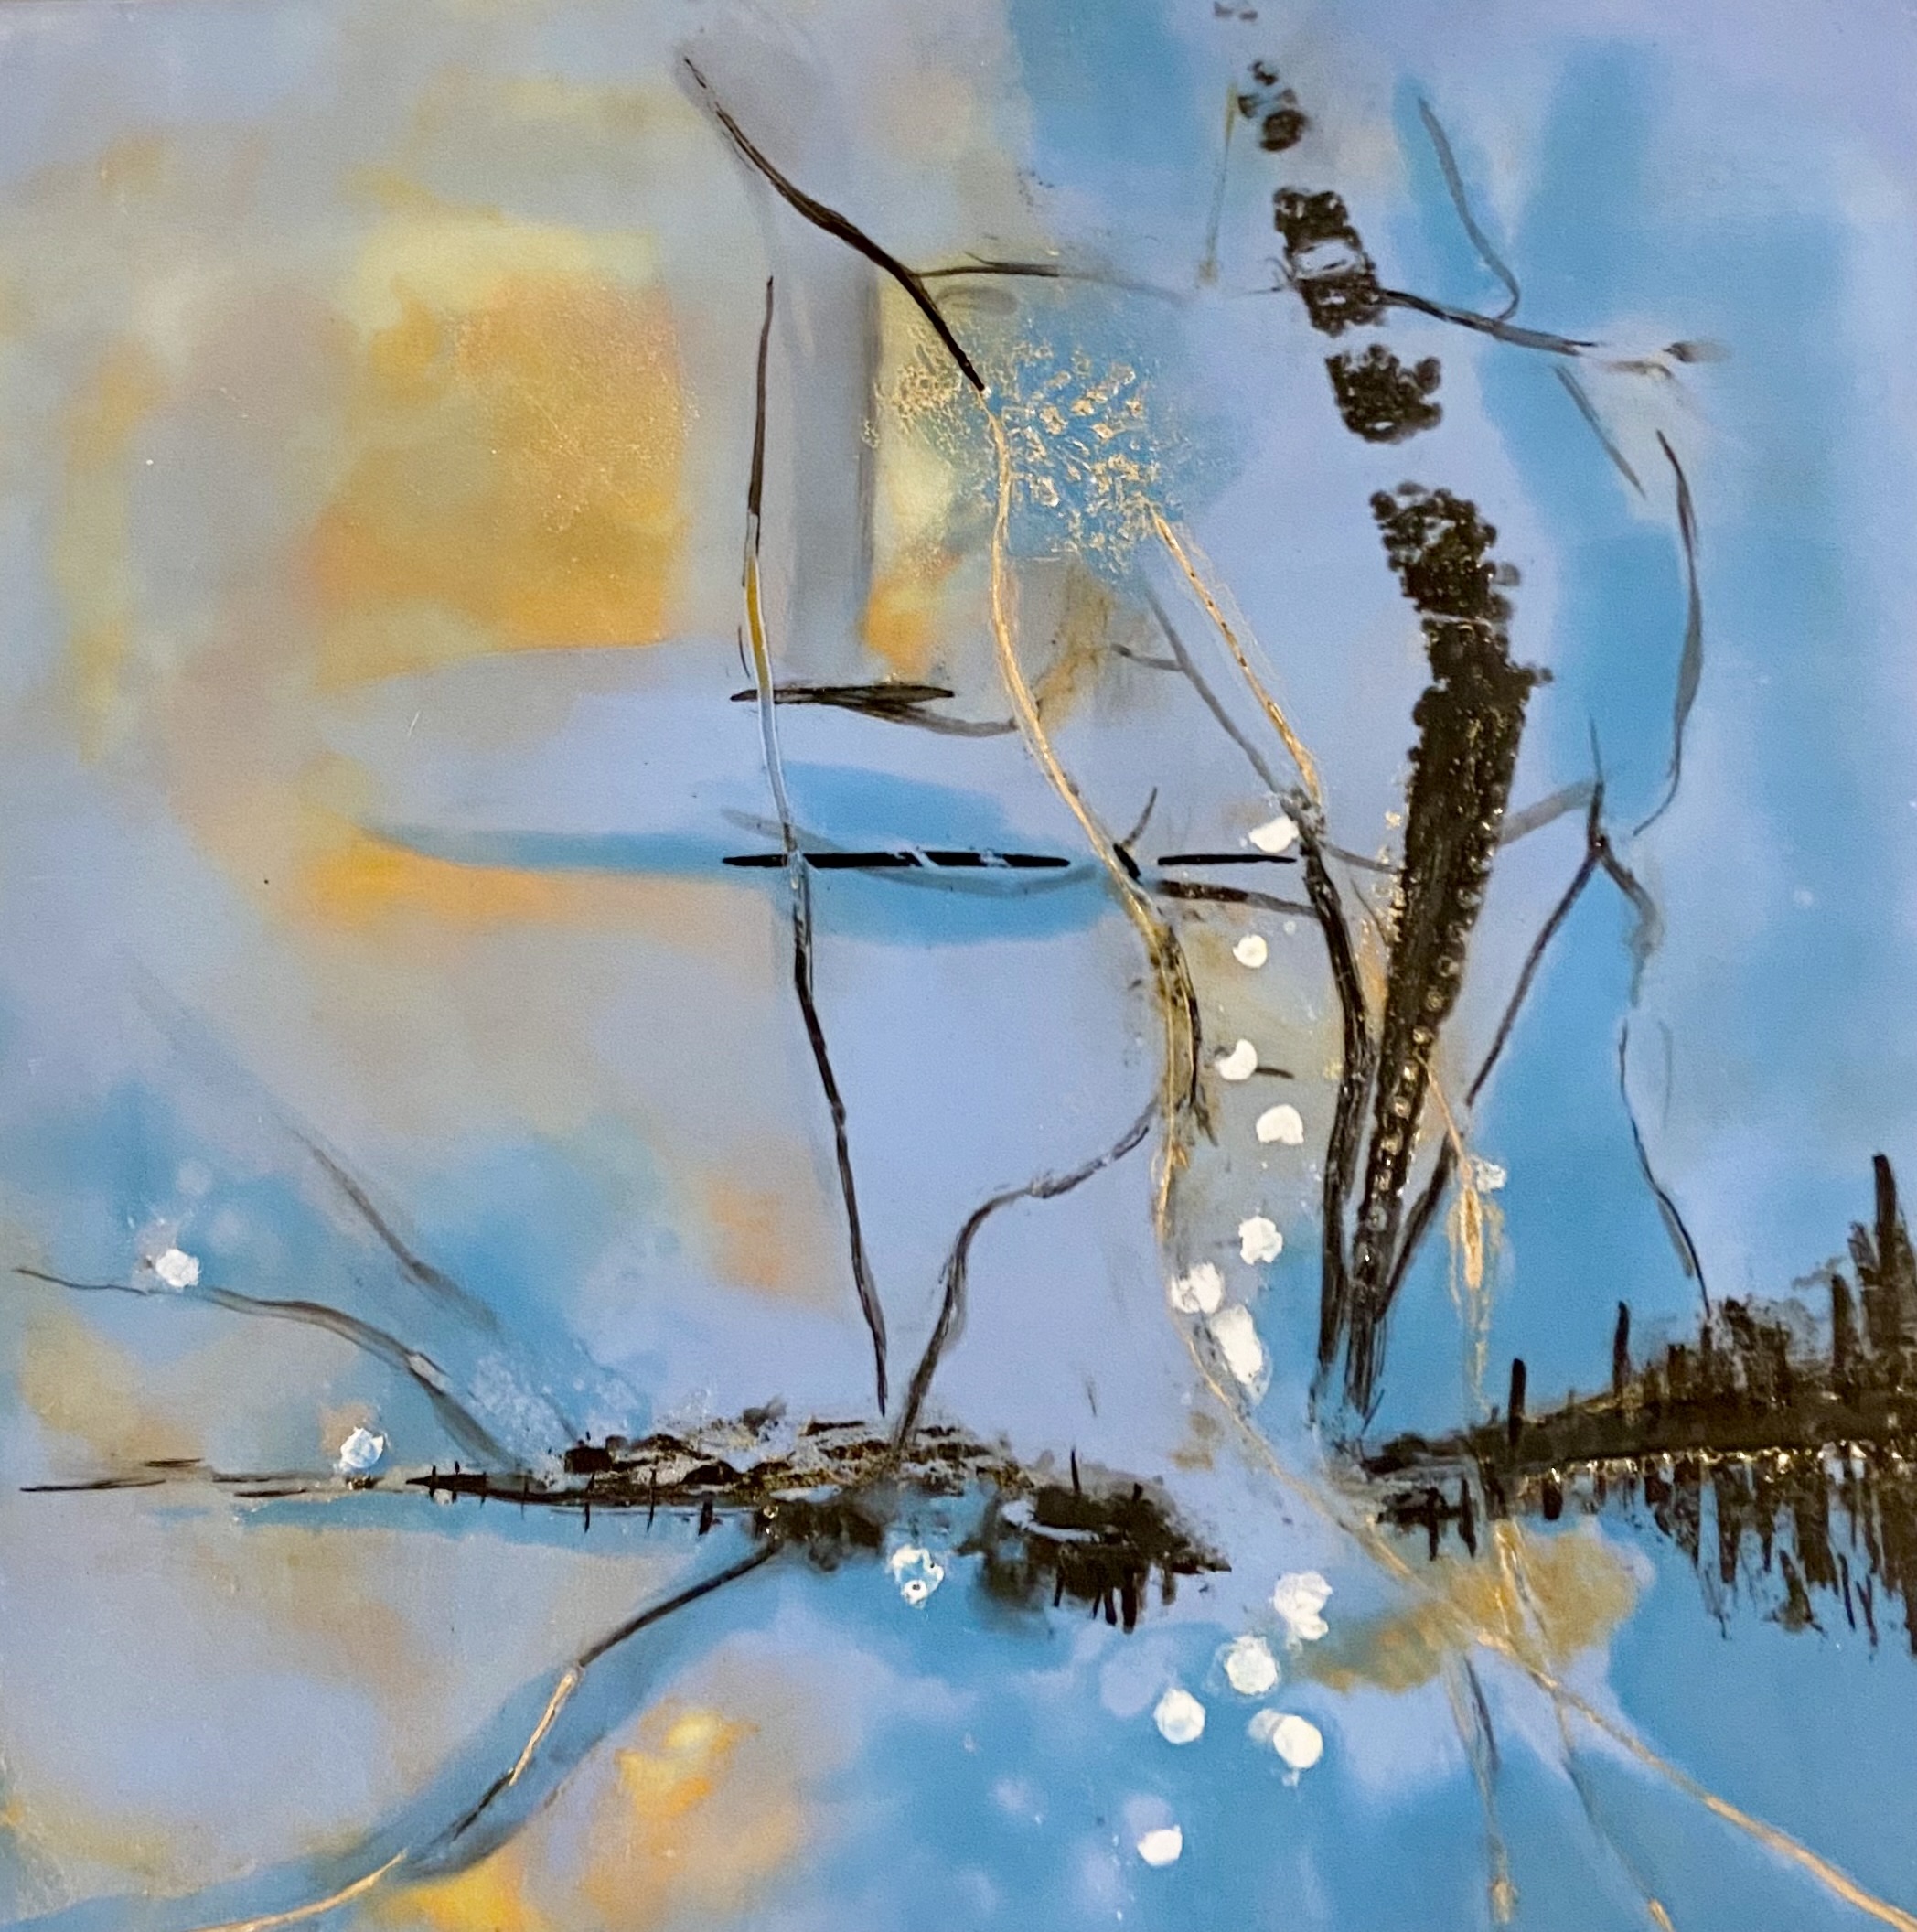 No Other Blue But You
Encaustic on panel
10″ x 10″
$550